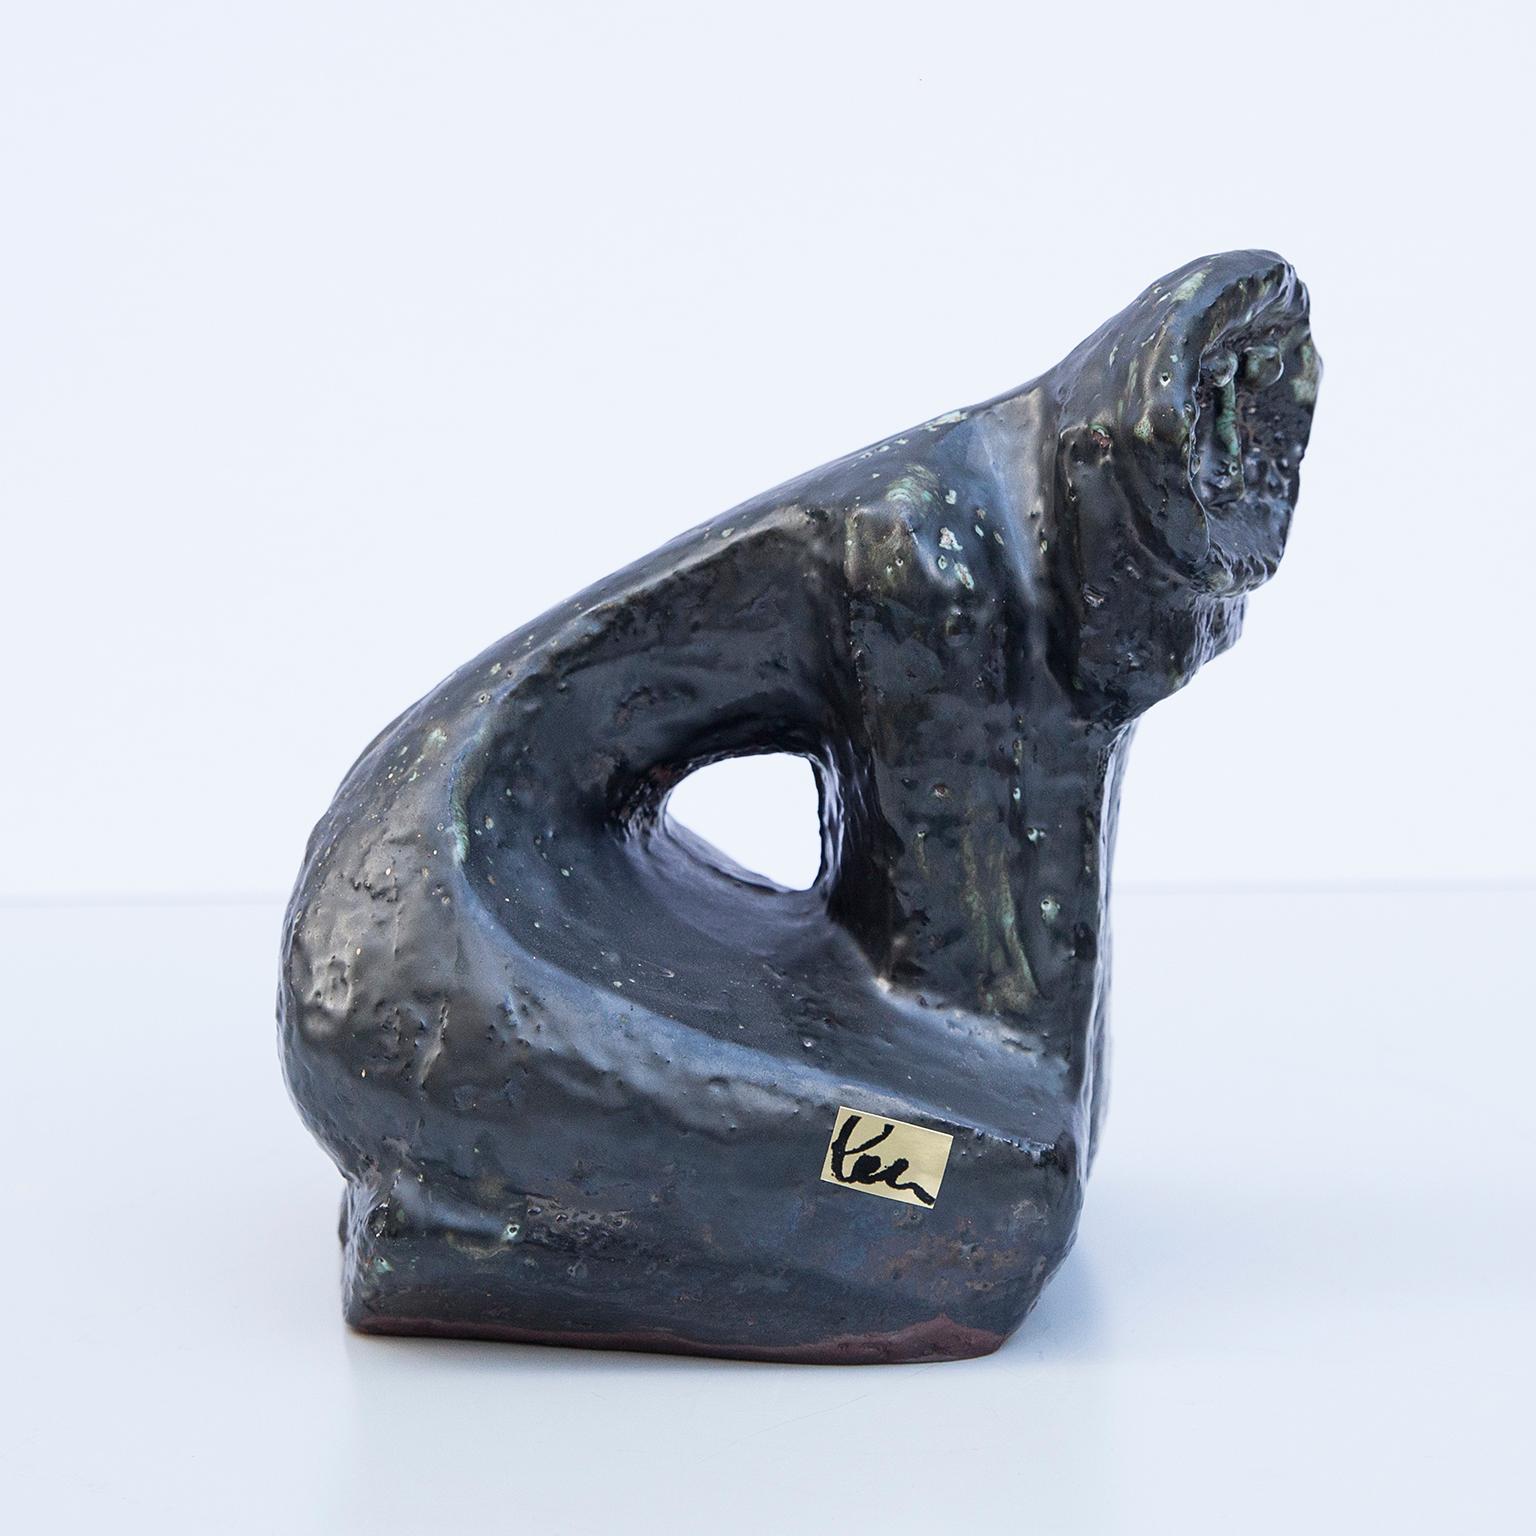 Unique ceramic object in form of a of a kneeling, thoughtful person in the style of Picasso from the Artist Helmut Friedrich Schäffenacker, Germany 1960’s.

Unique piece with artist mark.

Helmut Friedrich Schäffenacker (1921-2010) was a